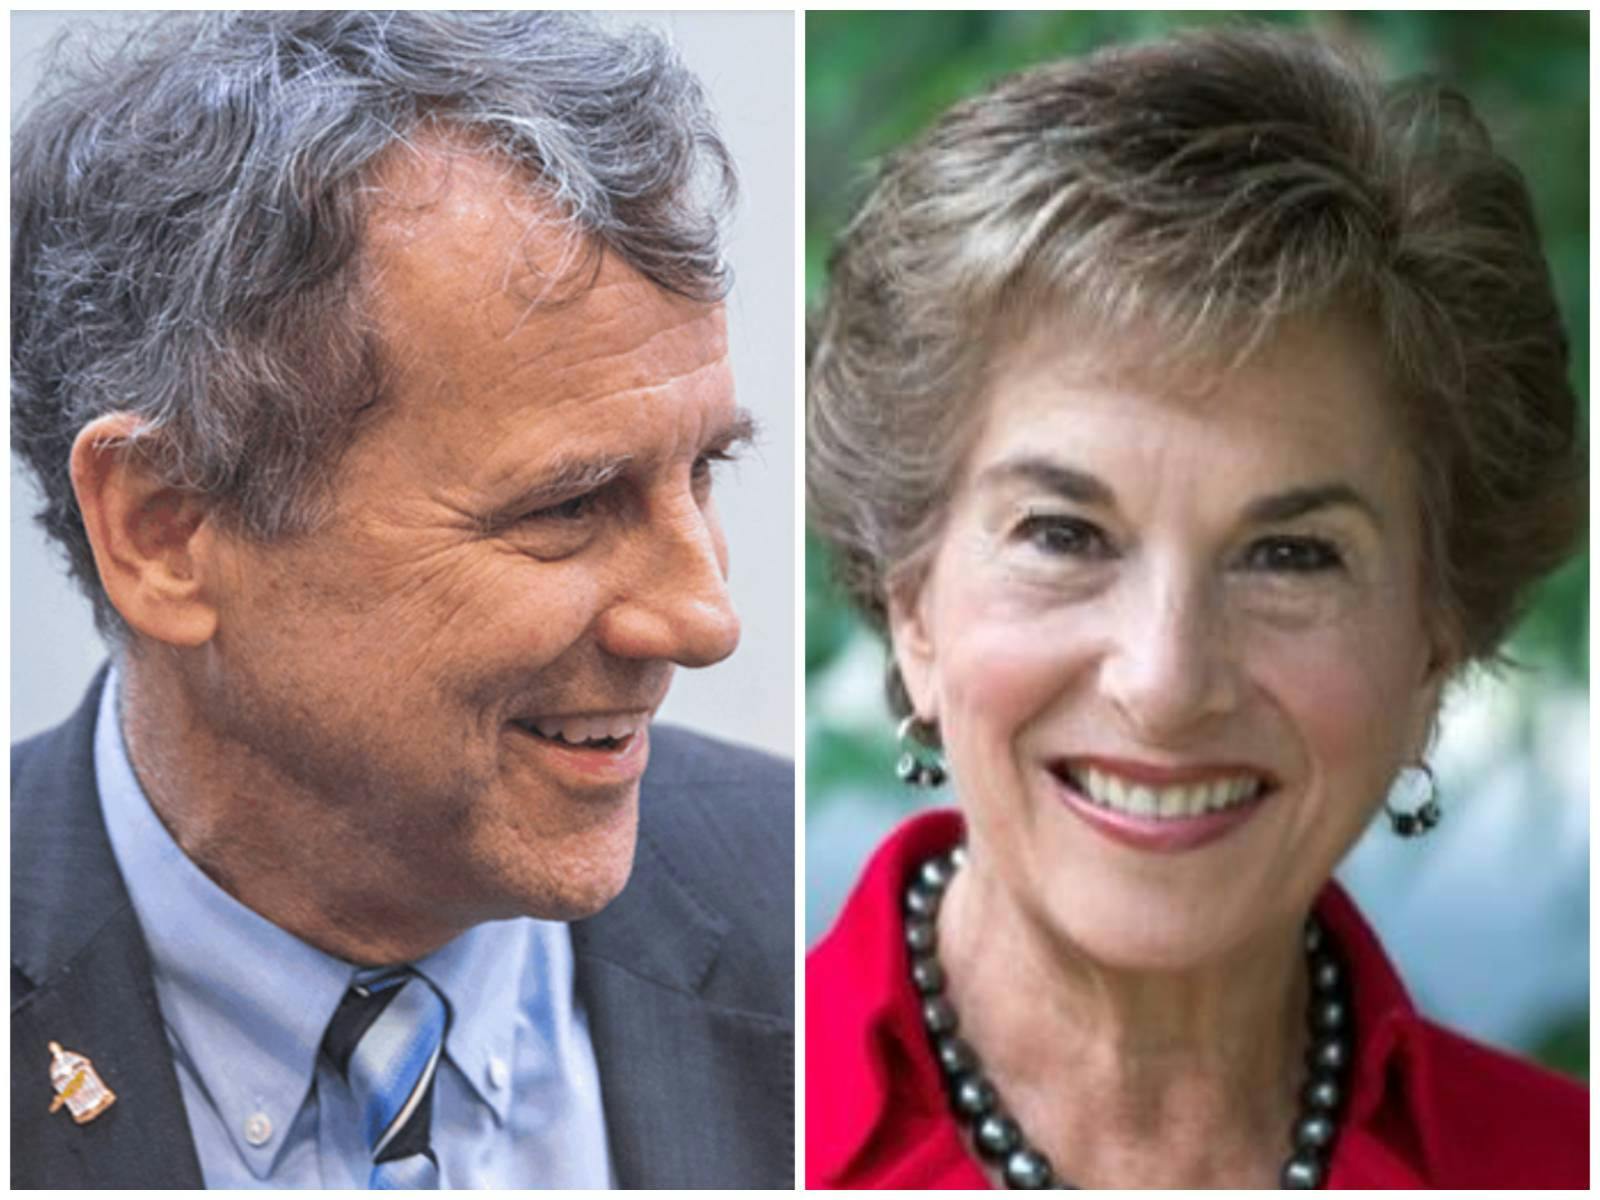 U.S. Rep. Sherrod Brown, D-Ohio, left, and U.S. Rep. Jan Schakowsky, D-Ill., are sponsoring legislation that would impose minimum nurse staffing standards for hospitals and health systems. (Images: Congress)